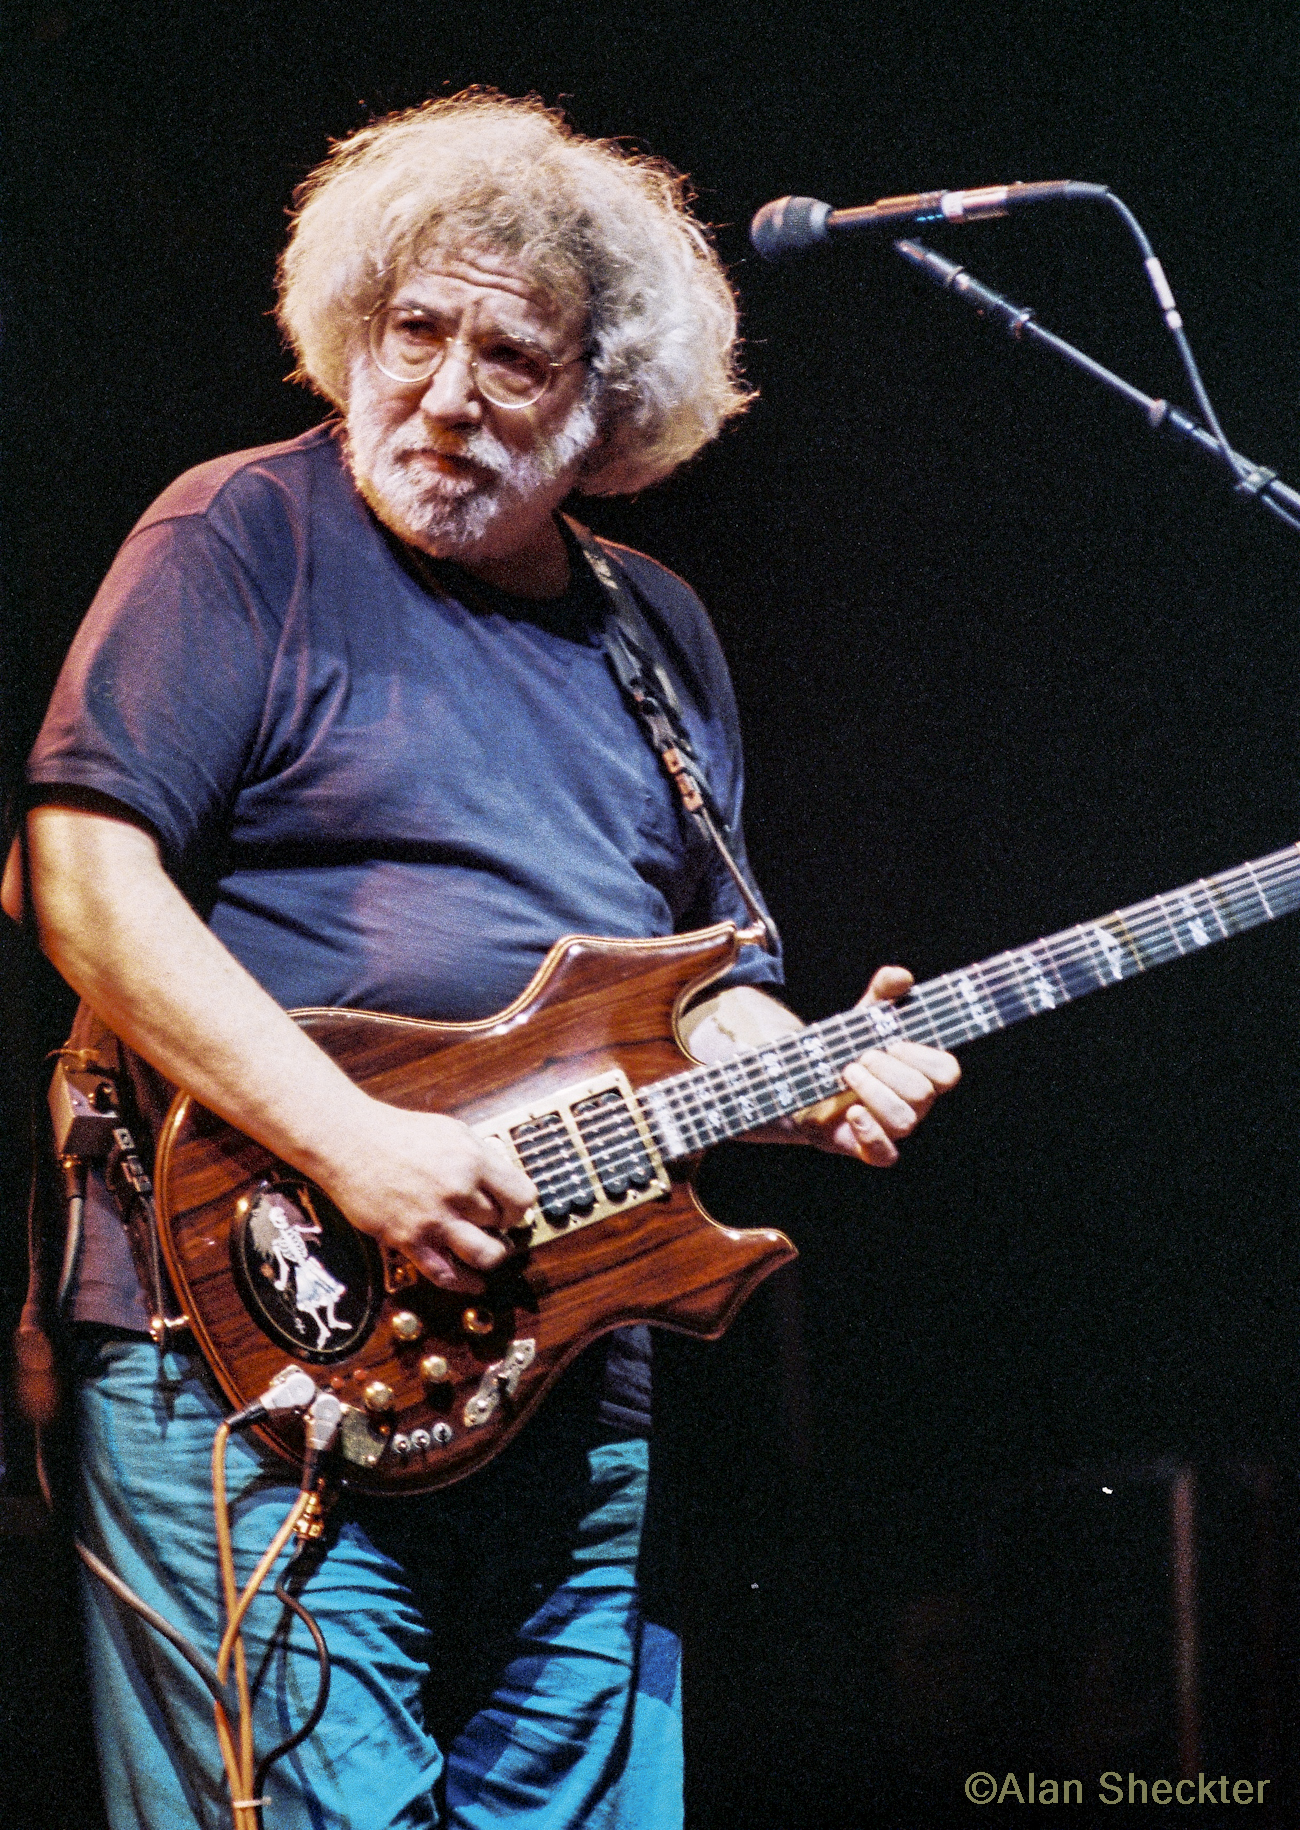 Missing Jerry today on what would be his 76th Birthday ...